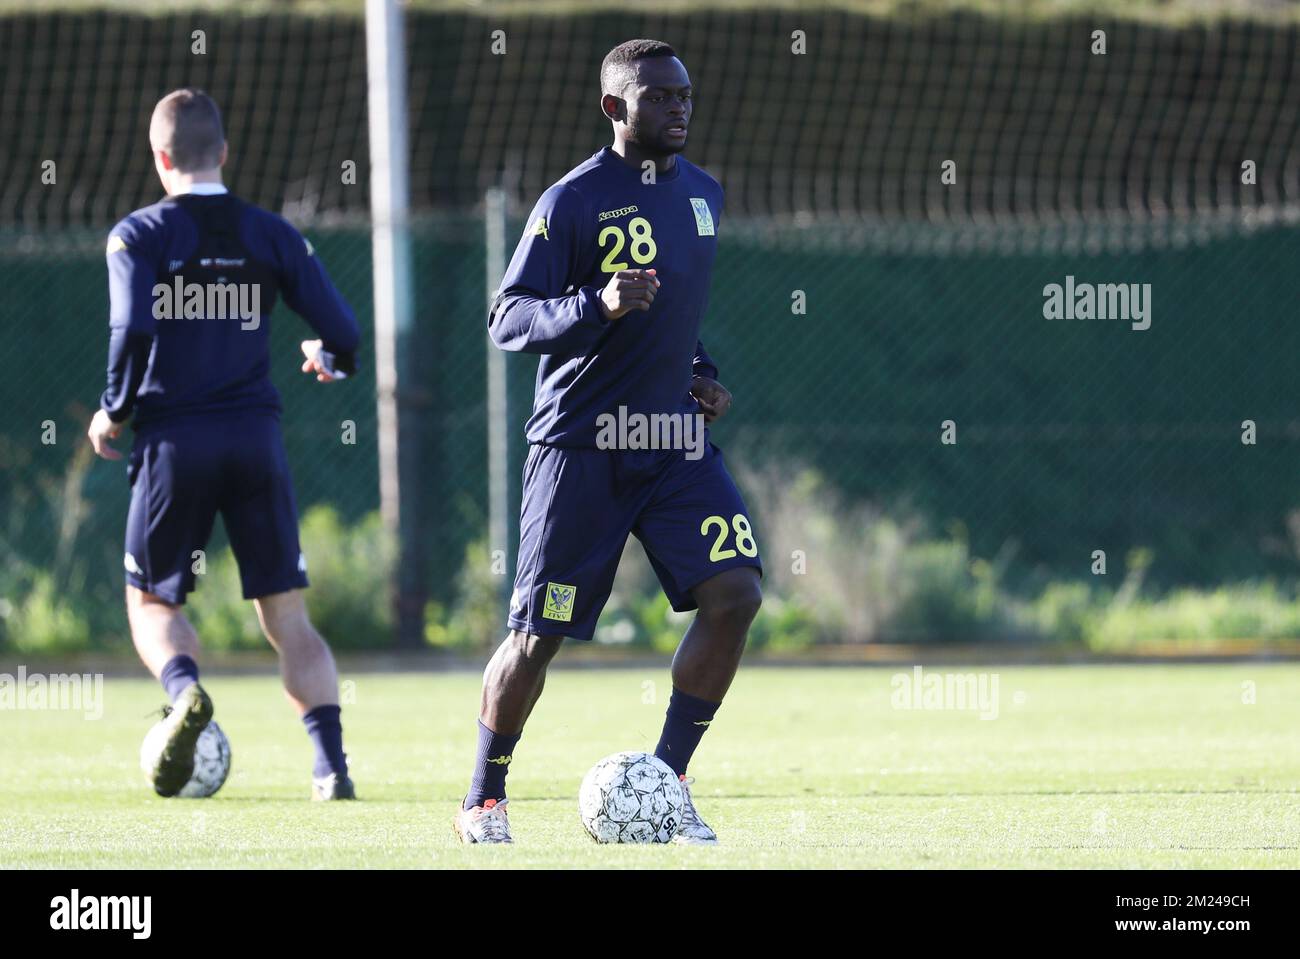 STVV Igor Vetokele pictured during a training session during the winter  training camp of Belgian first